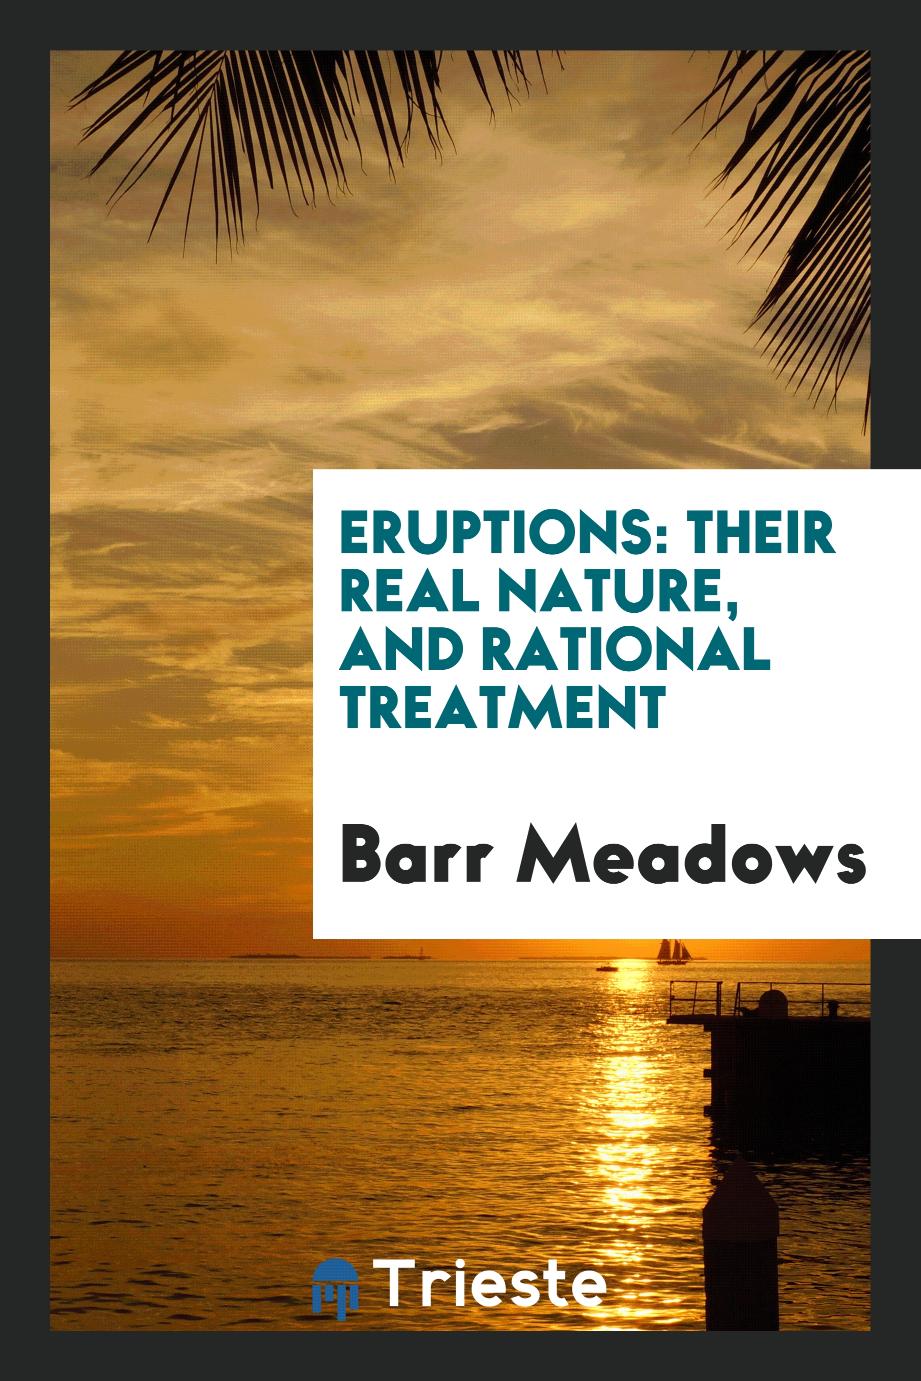 Eruptions: their real nature, and rational treatment